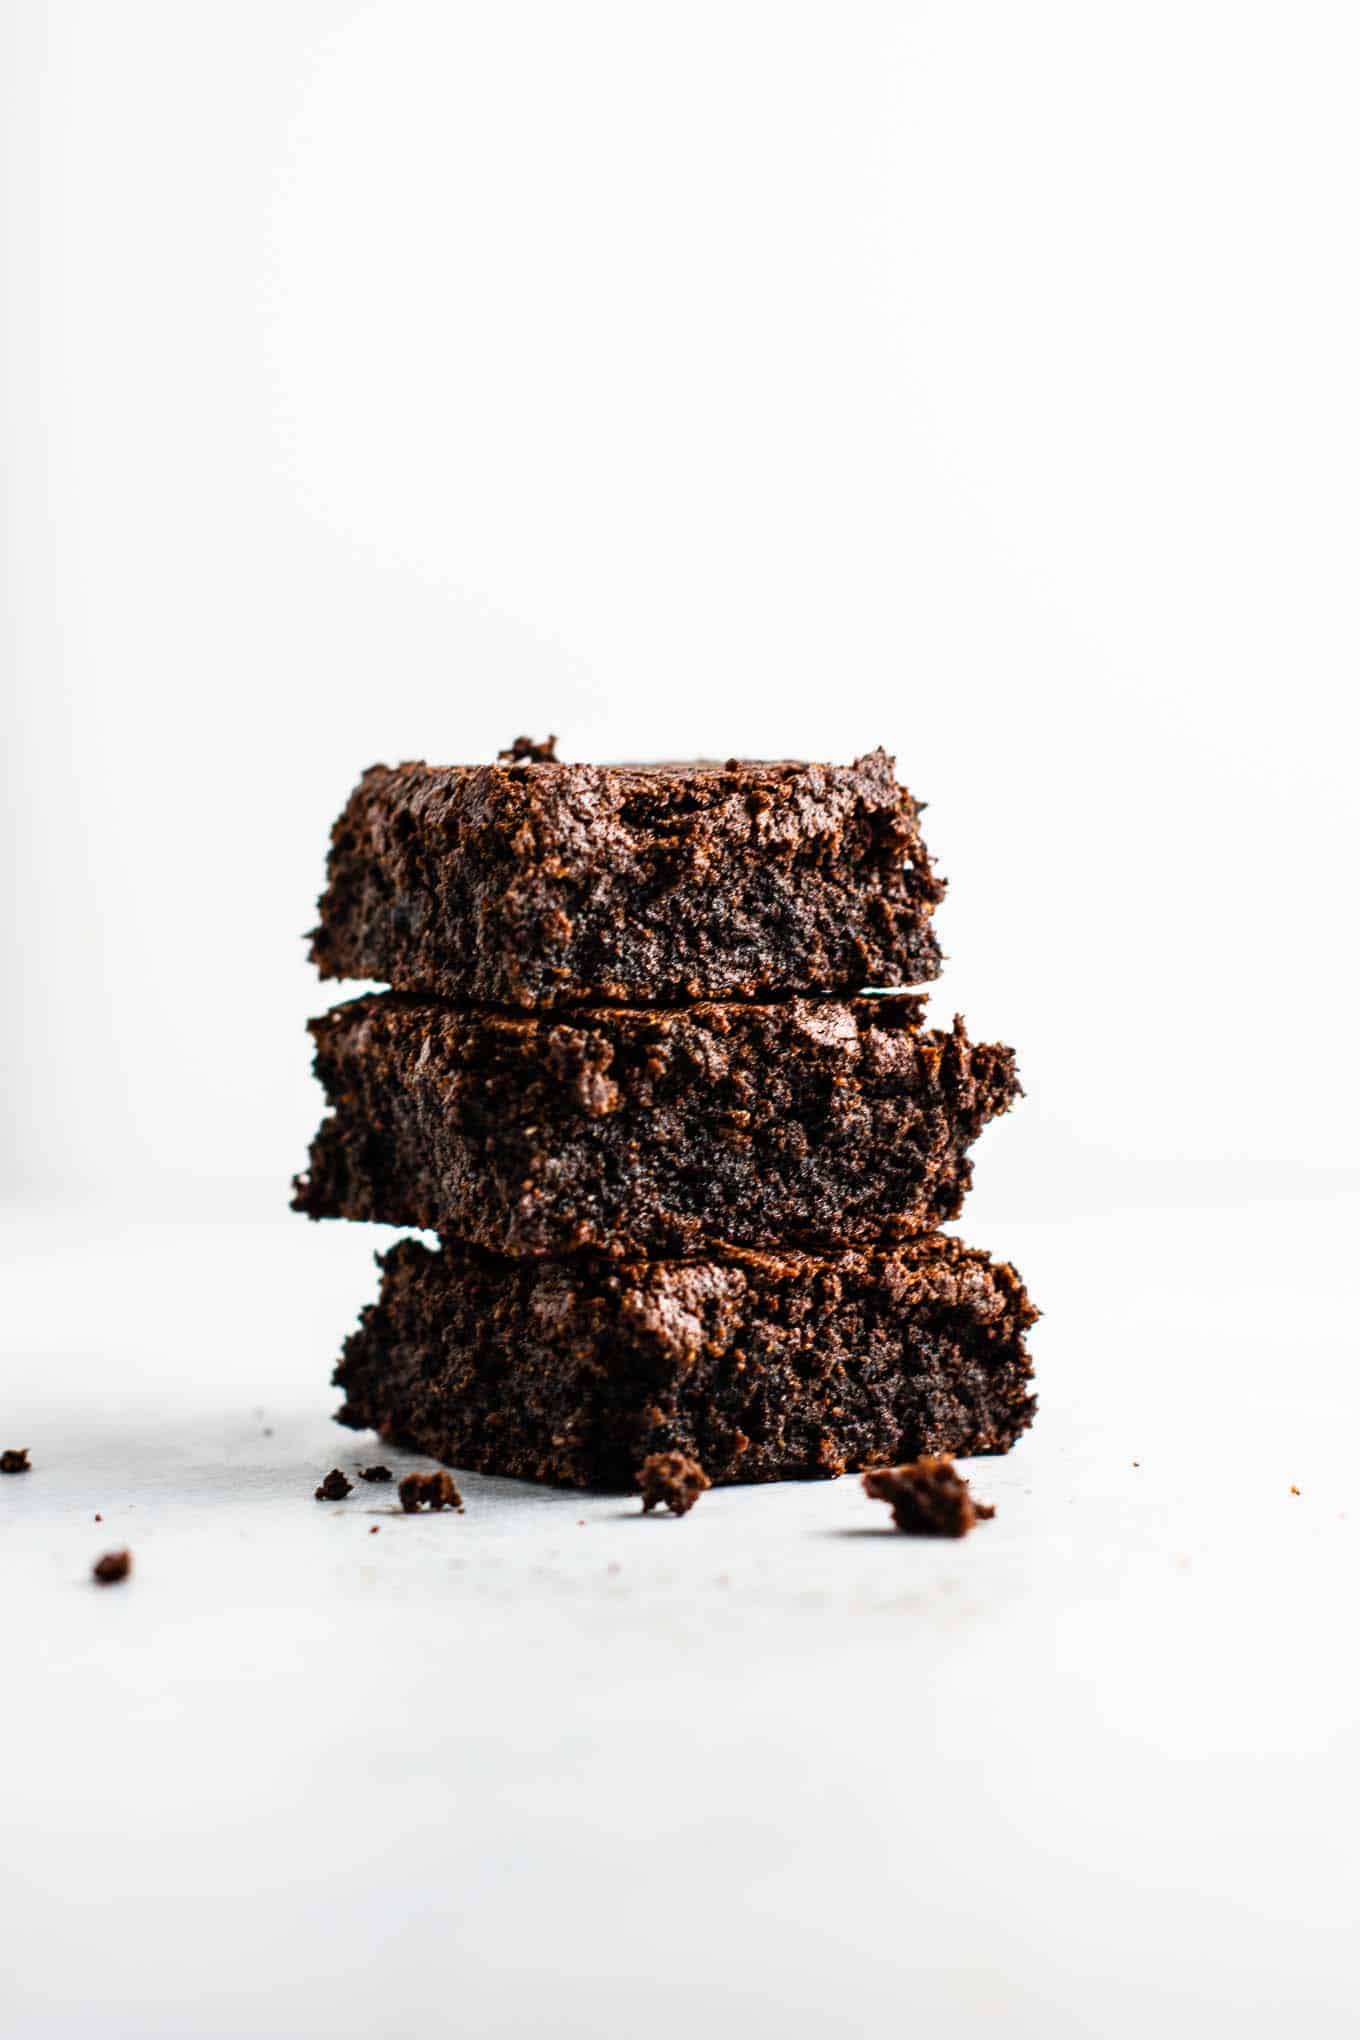 Easy gluten free brownies made with oat flour and coconut flour. Dairy free, fudgy, and taste amazing! #glutenfreebrownies #glutenfree #glutenfreedessert #dessert #brownies #oatflour #coconutflour